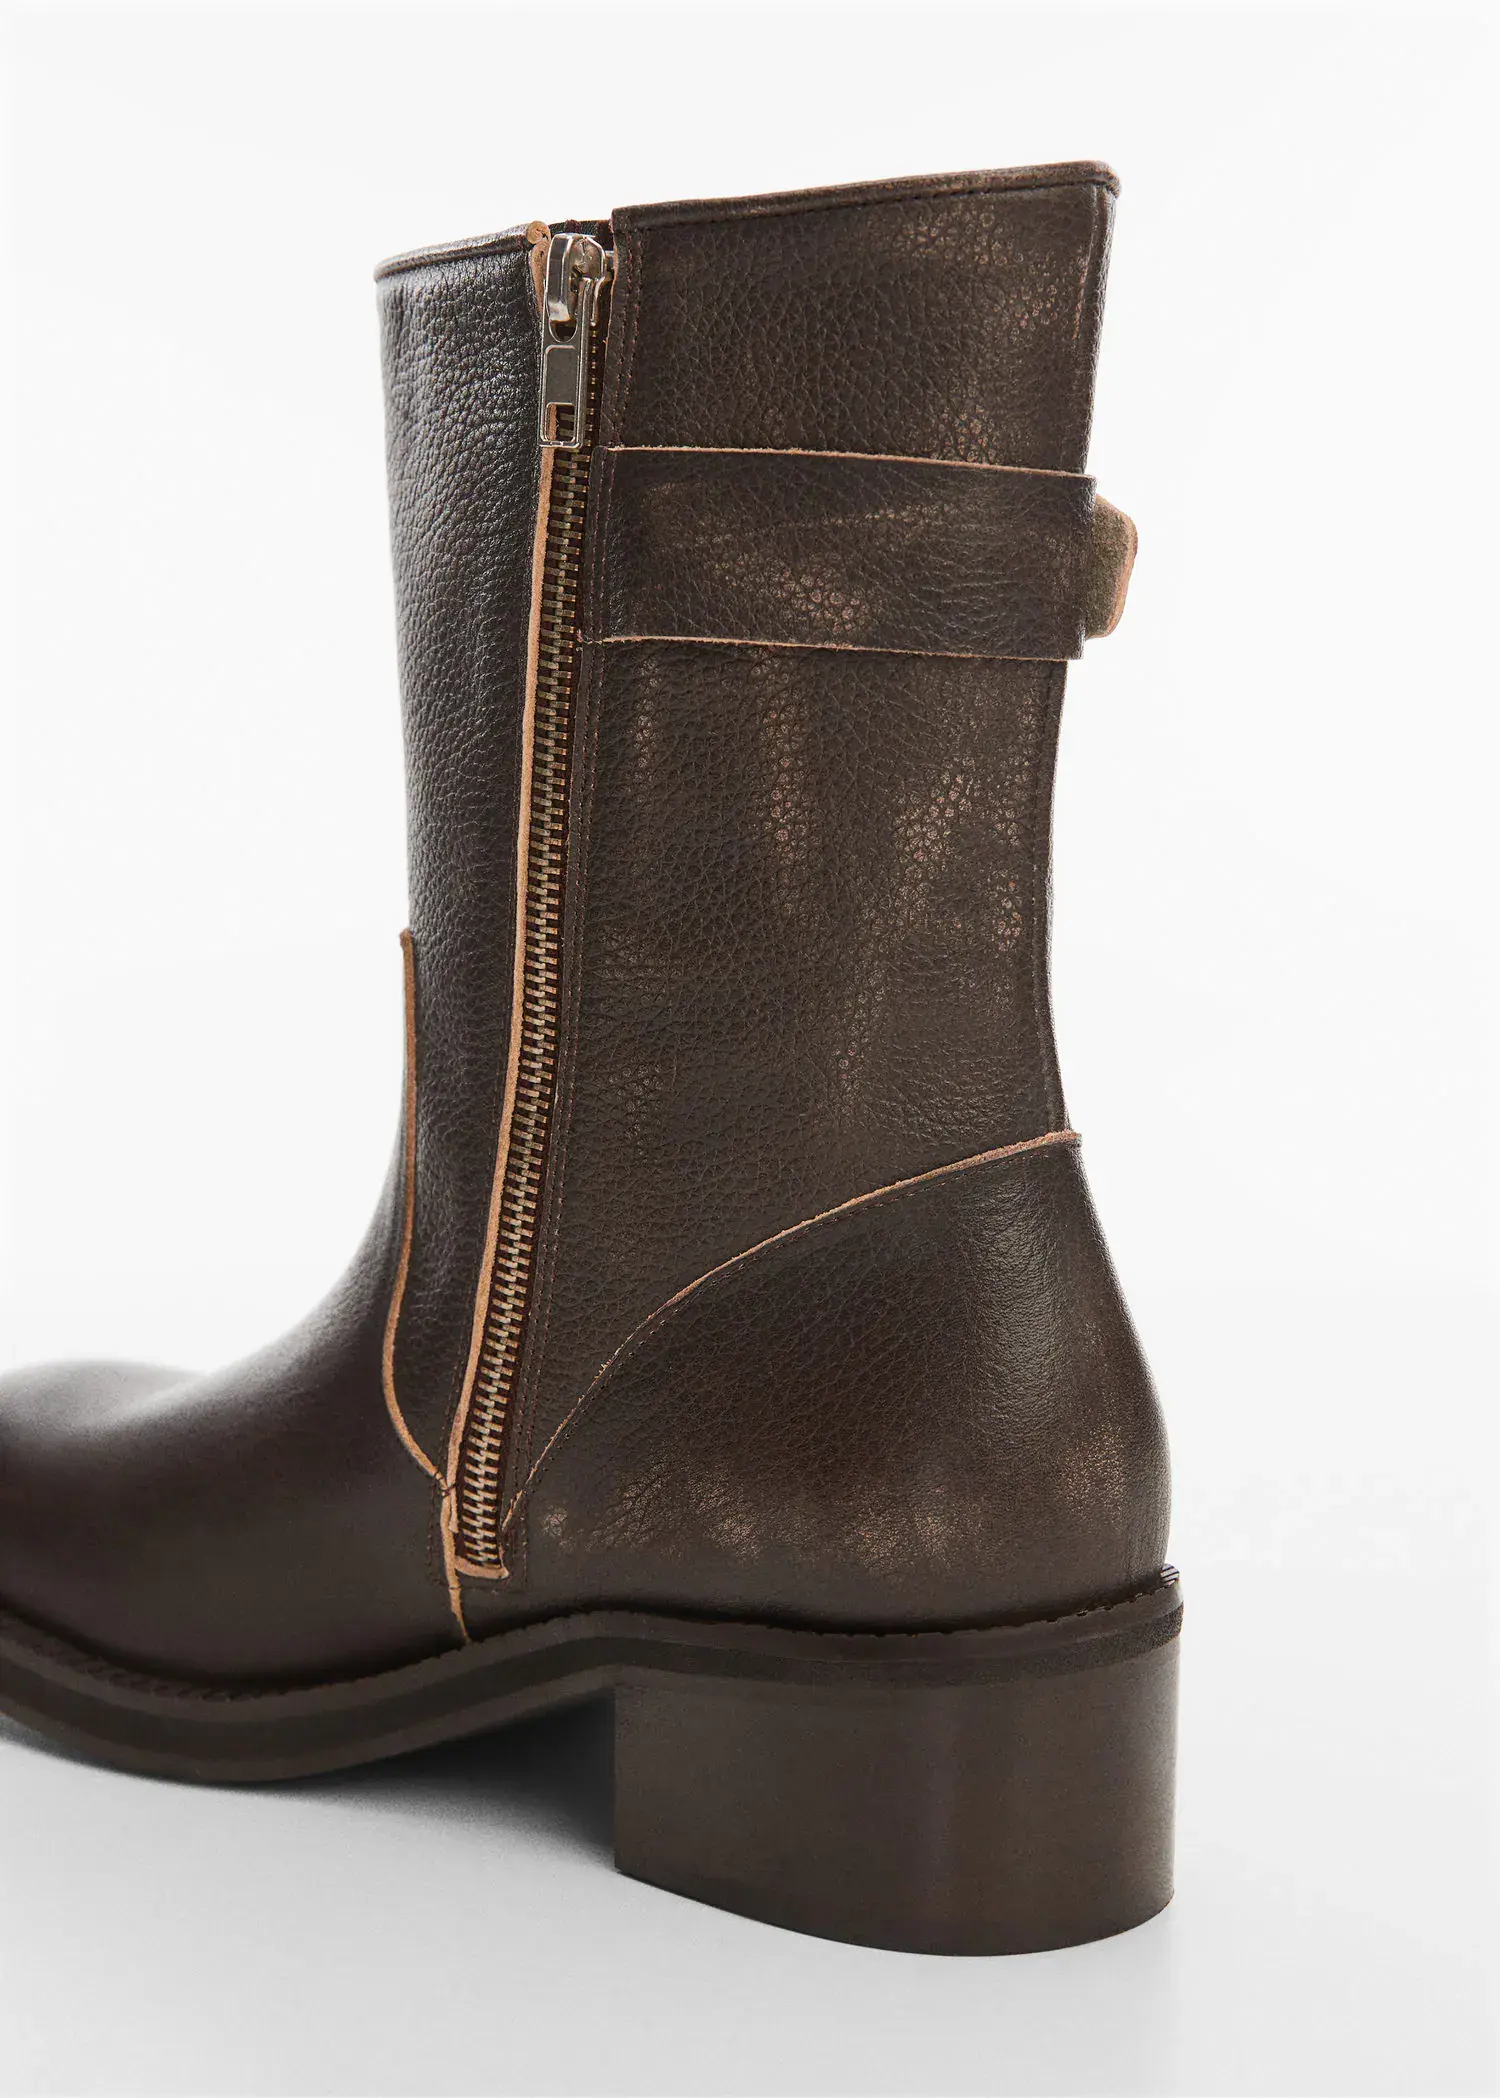 Mango Leather biker ankle boots. 2